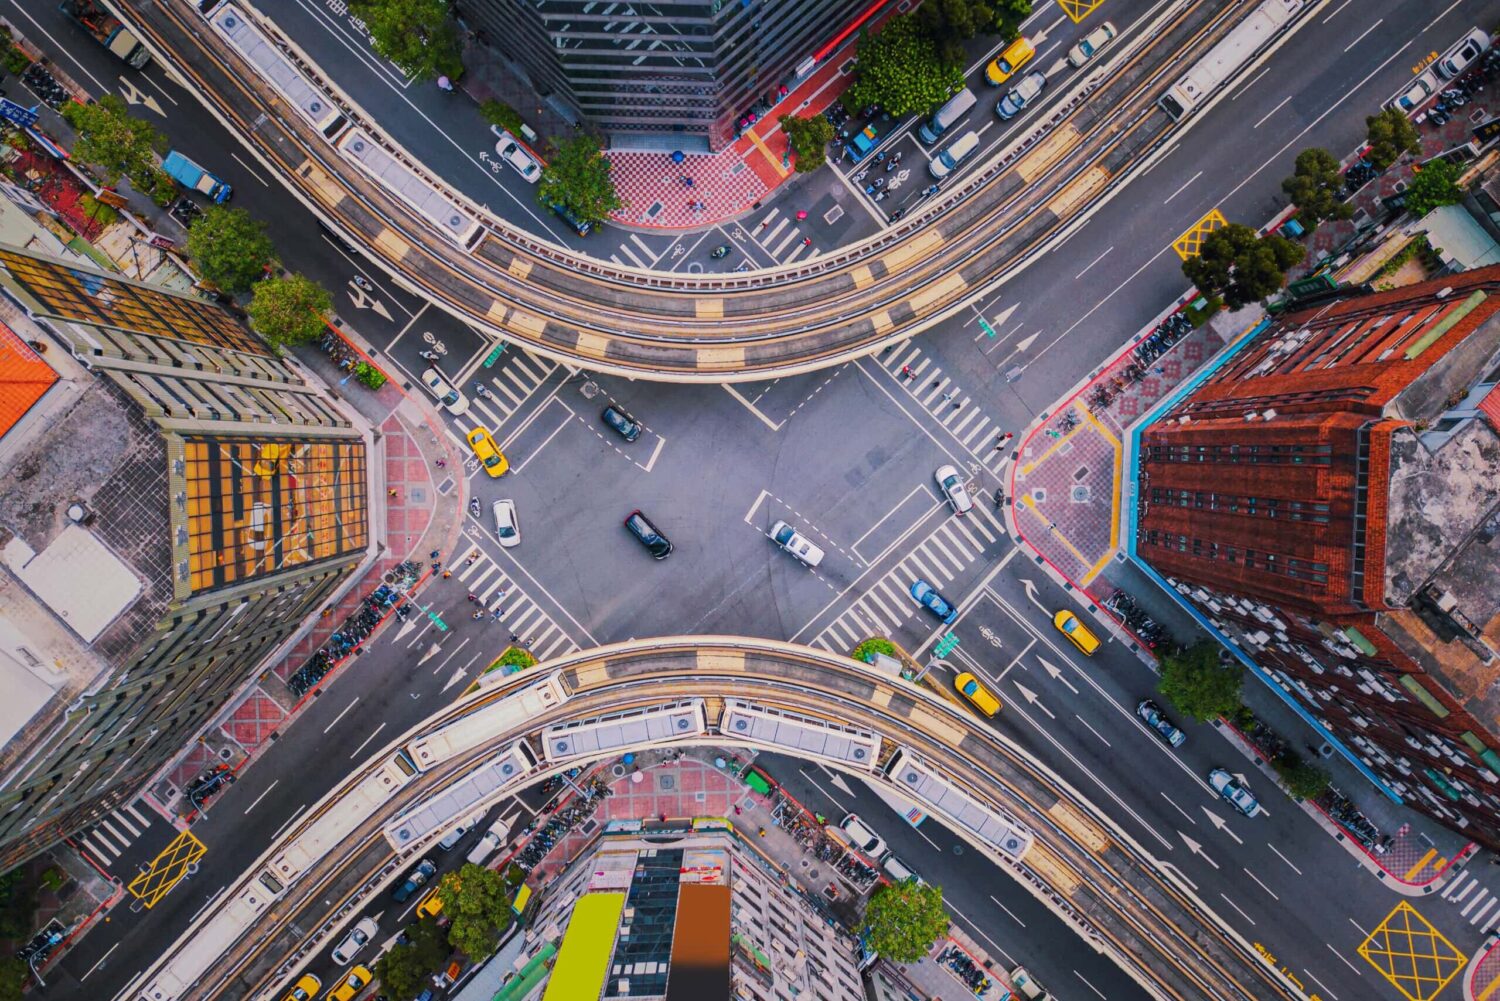 Overhead view of busy city intersection